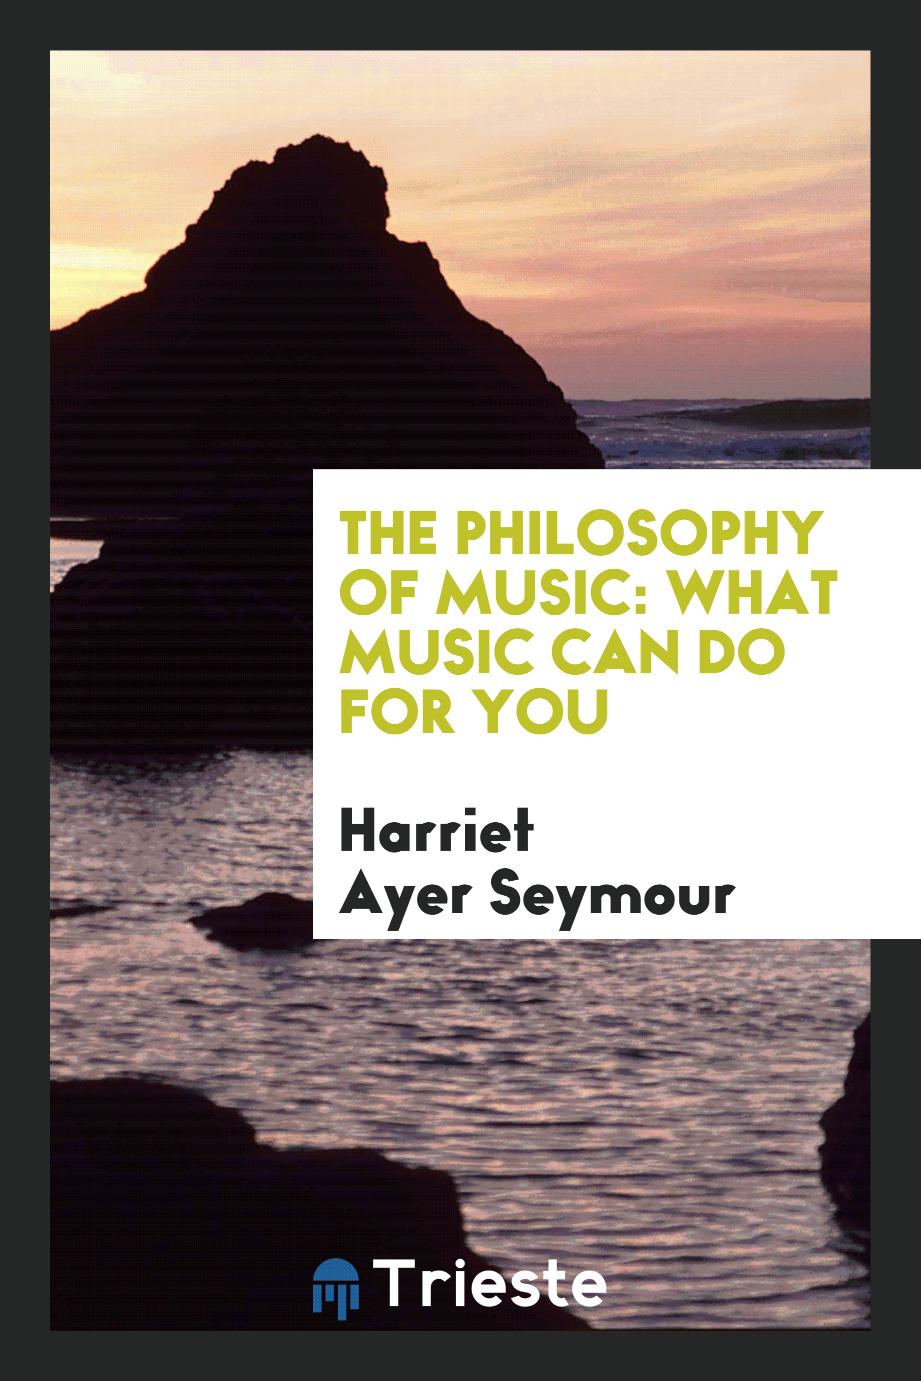 The philosophy of music: what music can do for you